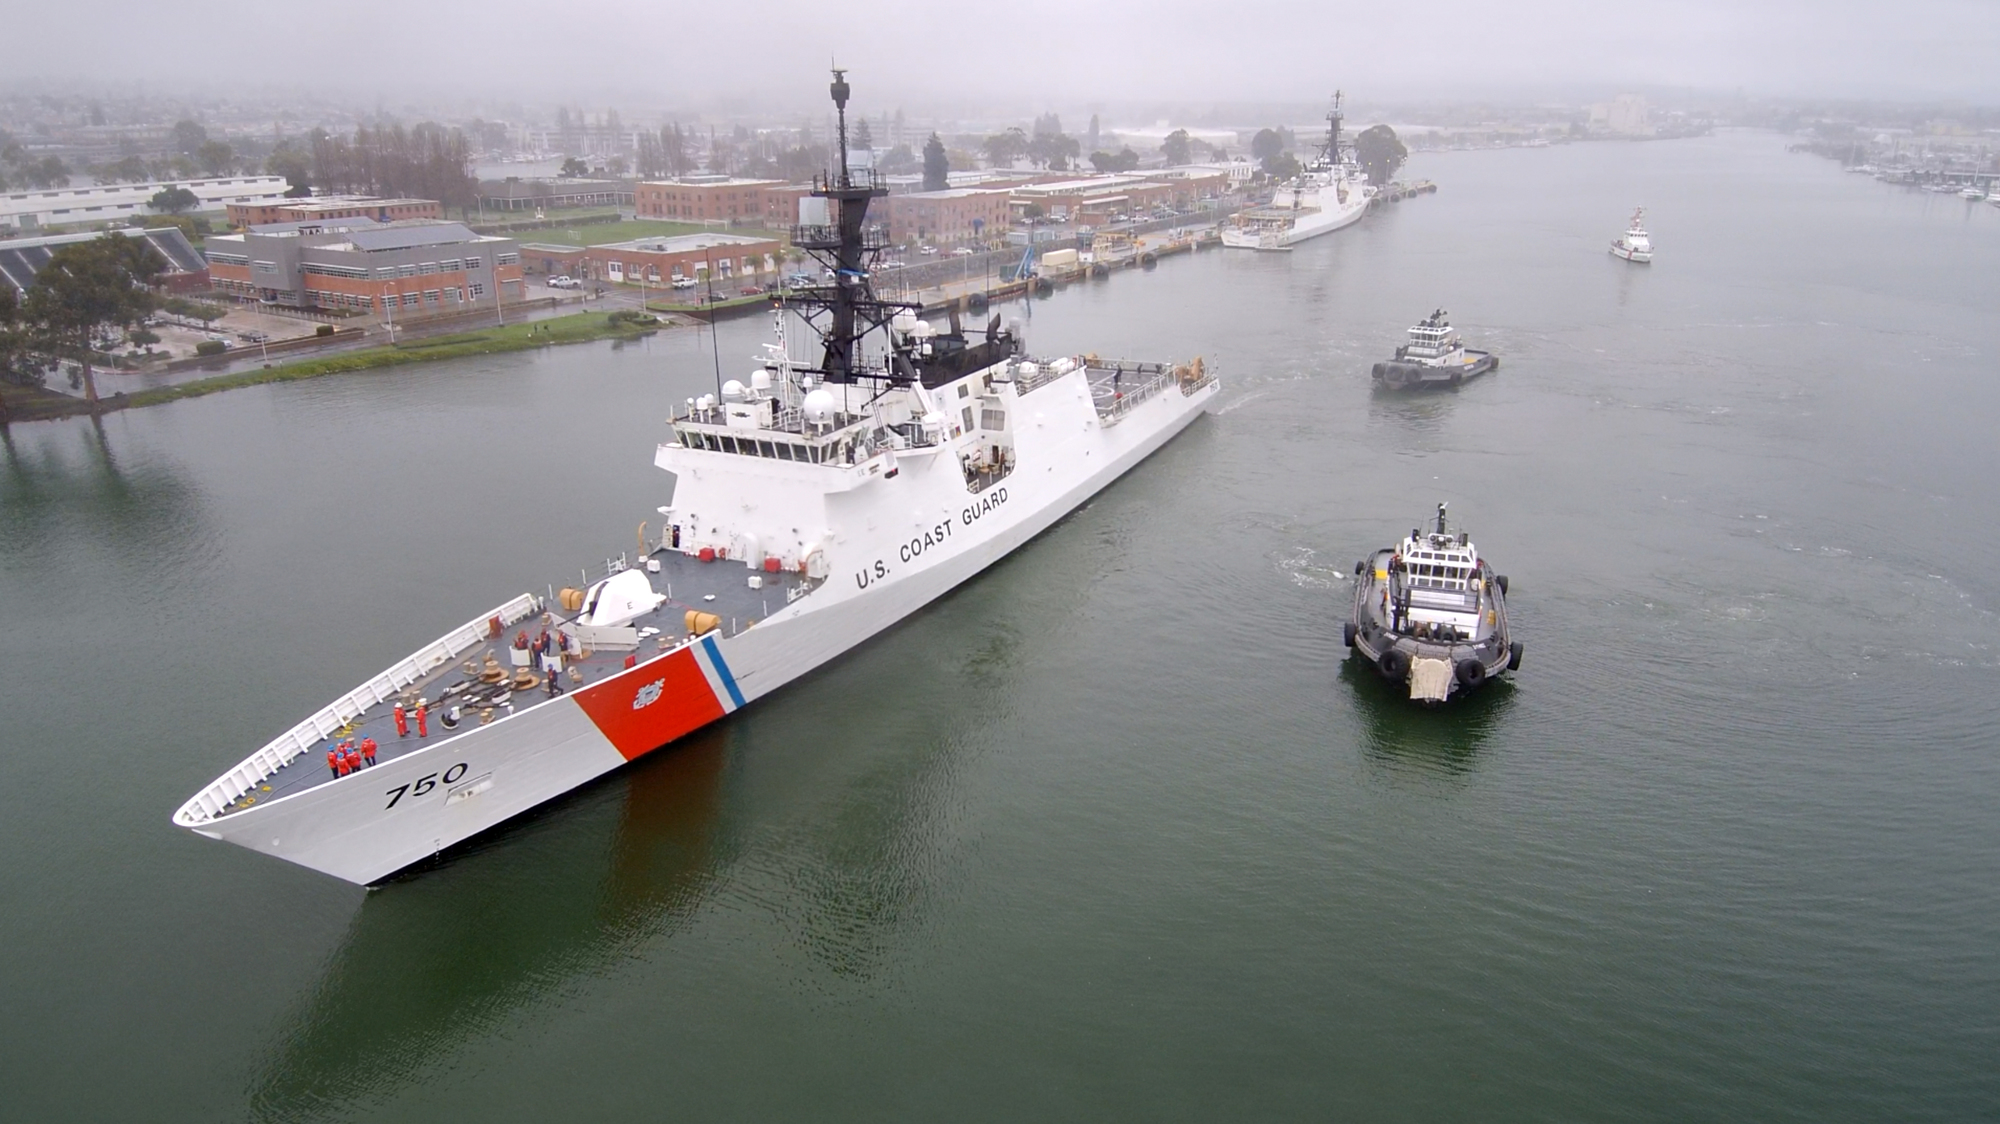 Thumbnail from video of the Coast Guard Cutter Bertholf departing Alameda, California for Western Pacific patrol